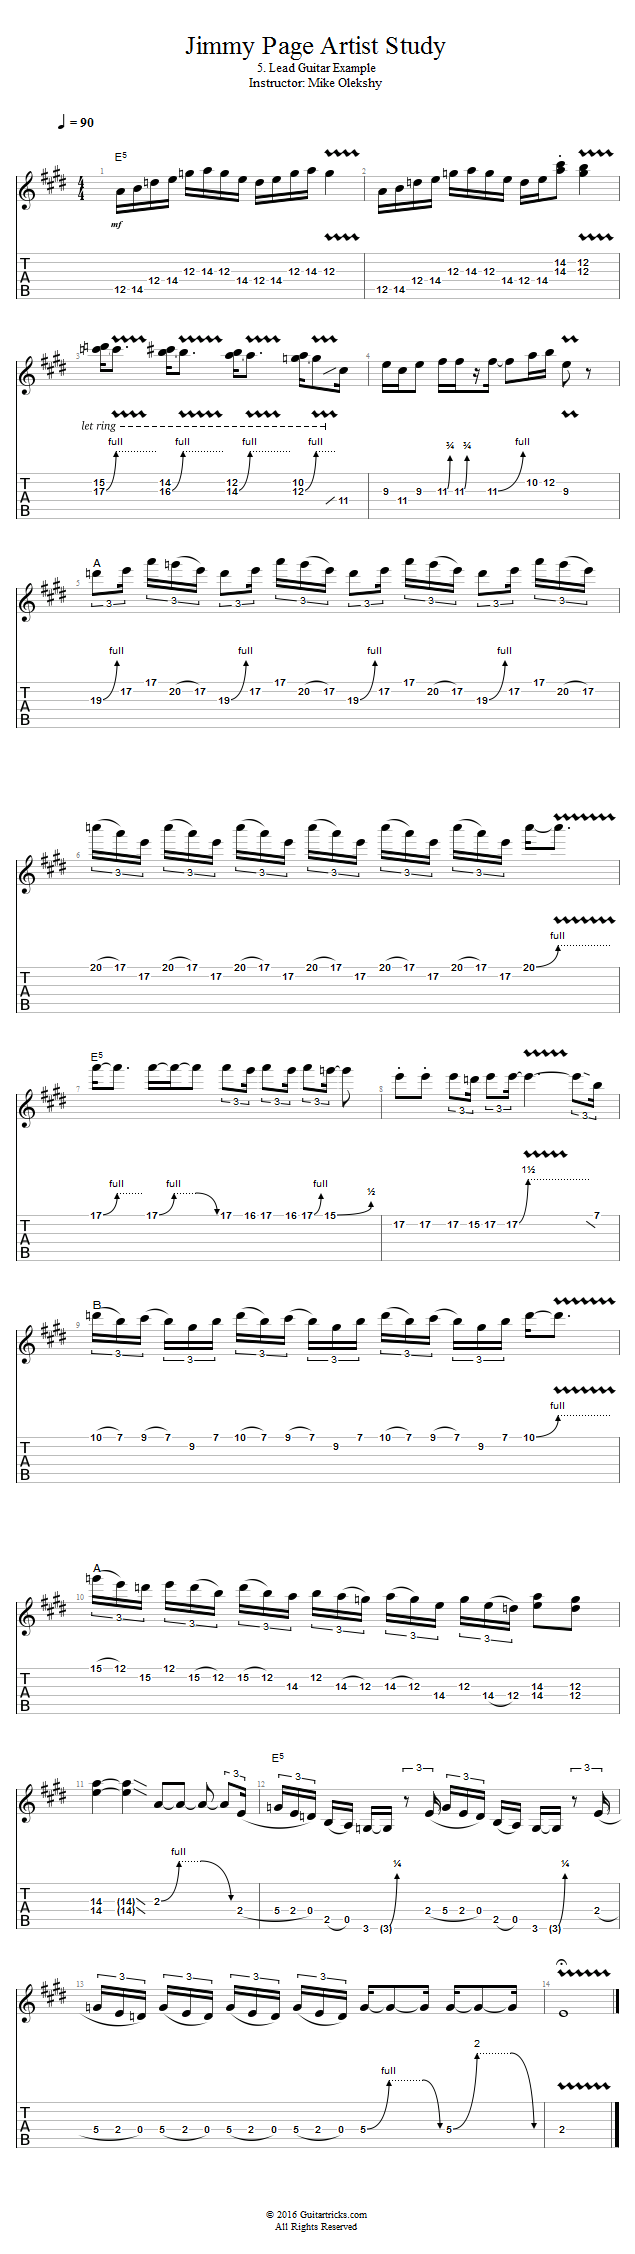 Lead Guitar Example song notation